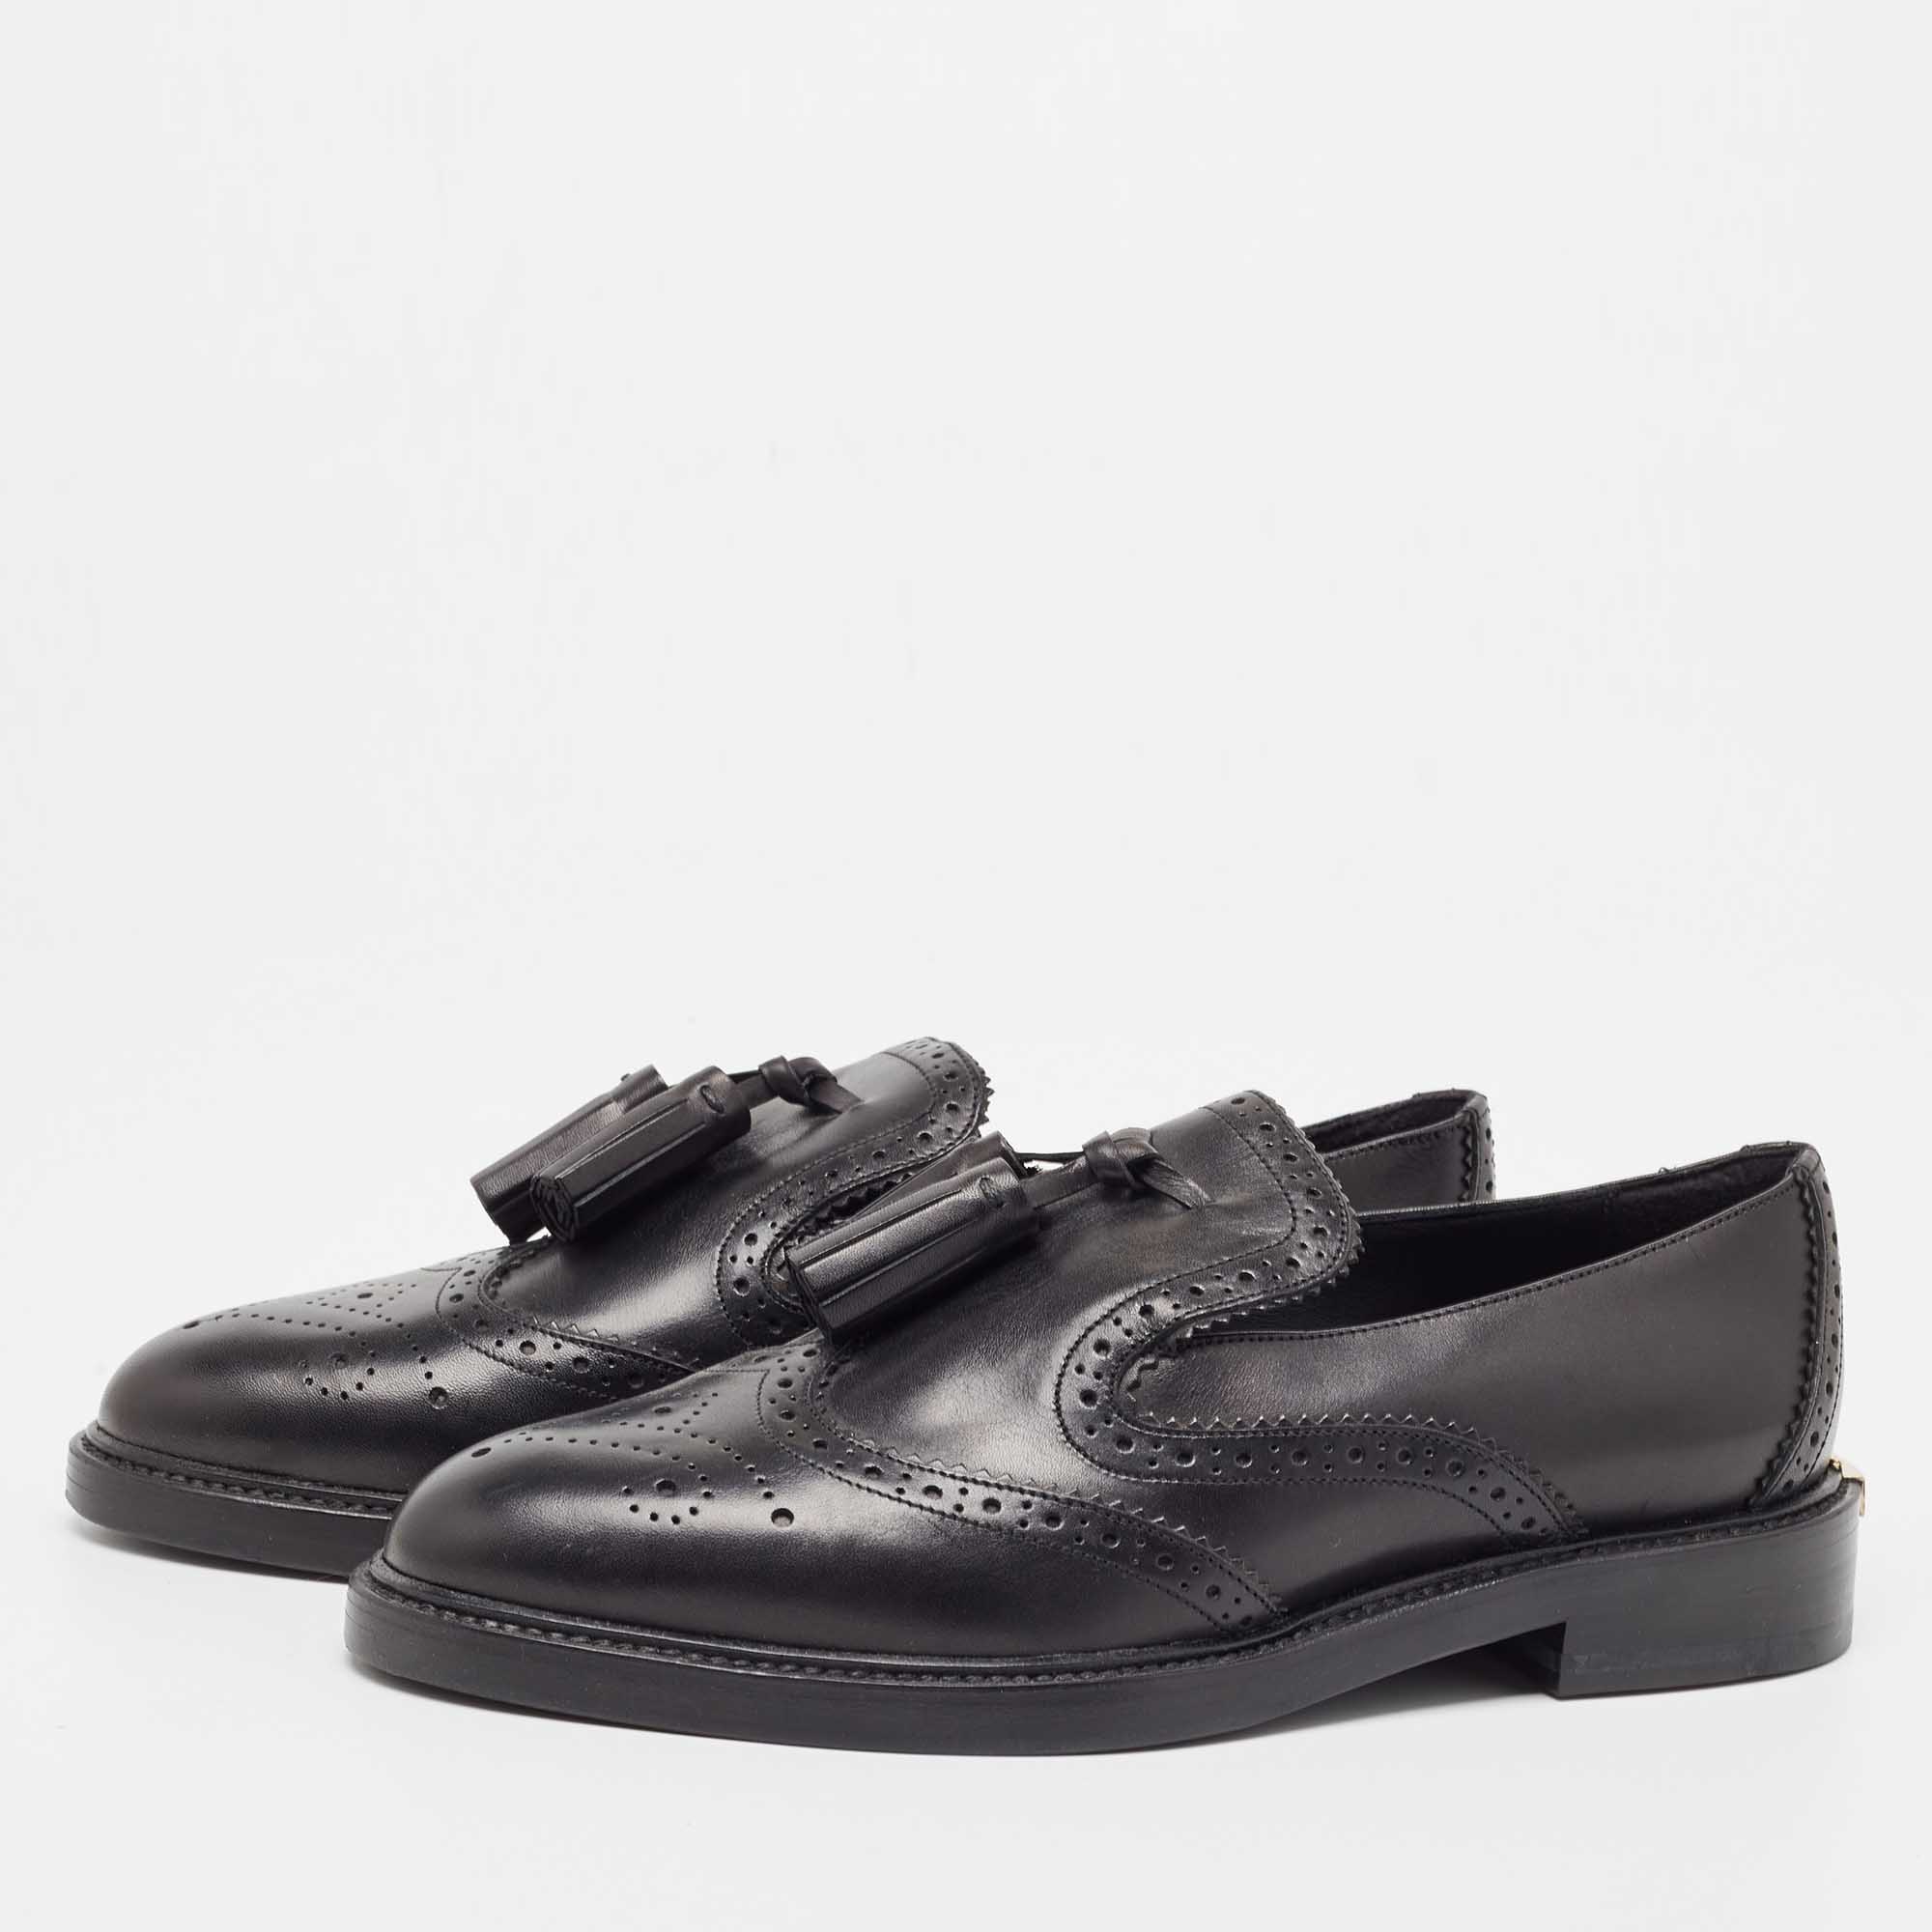 

Burberry Black Brogue Leather Tassel Detail Loafers Size